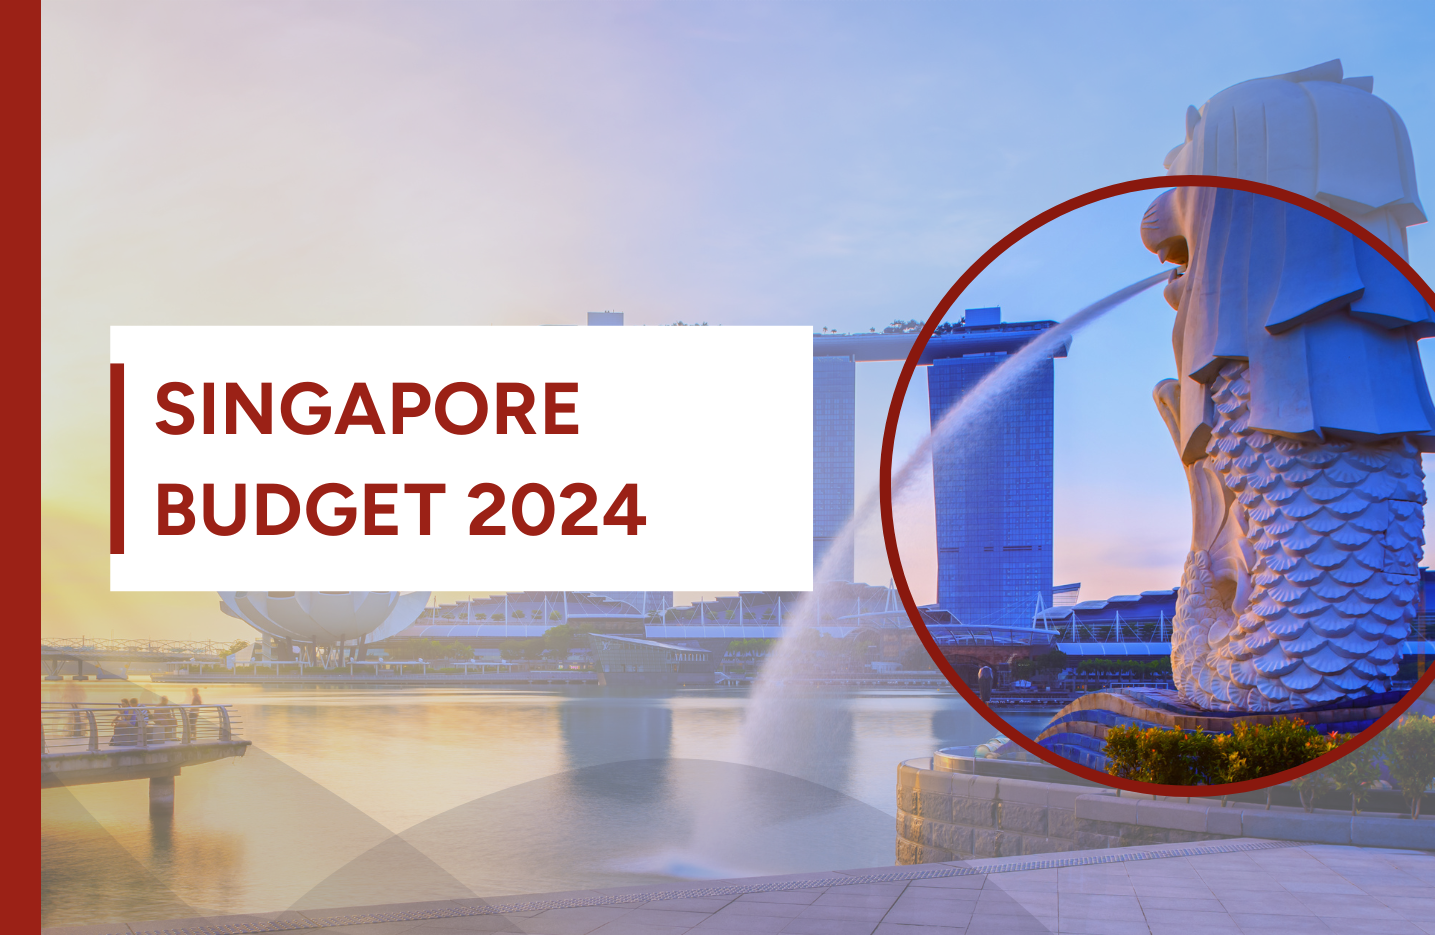 The Singapore Budget 2024: What It Means for Startups, SMEs, and Entrepreneurs